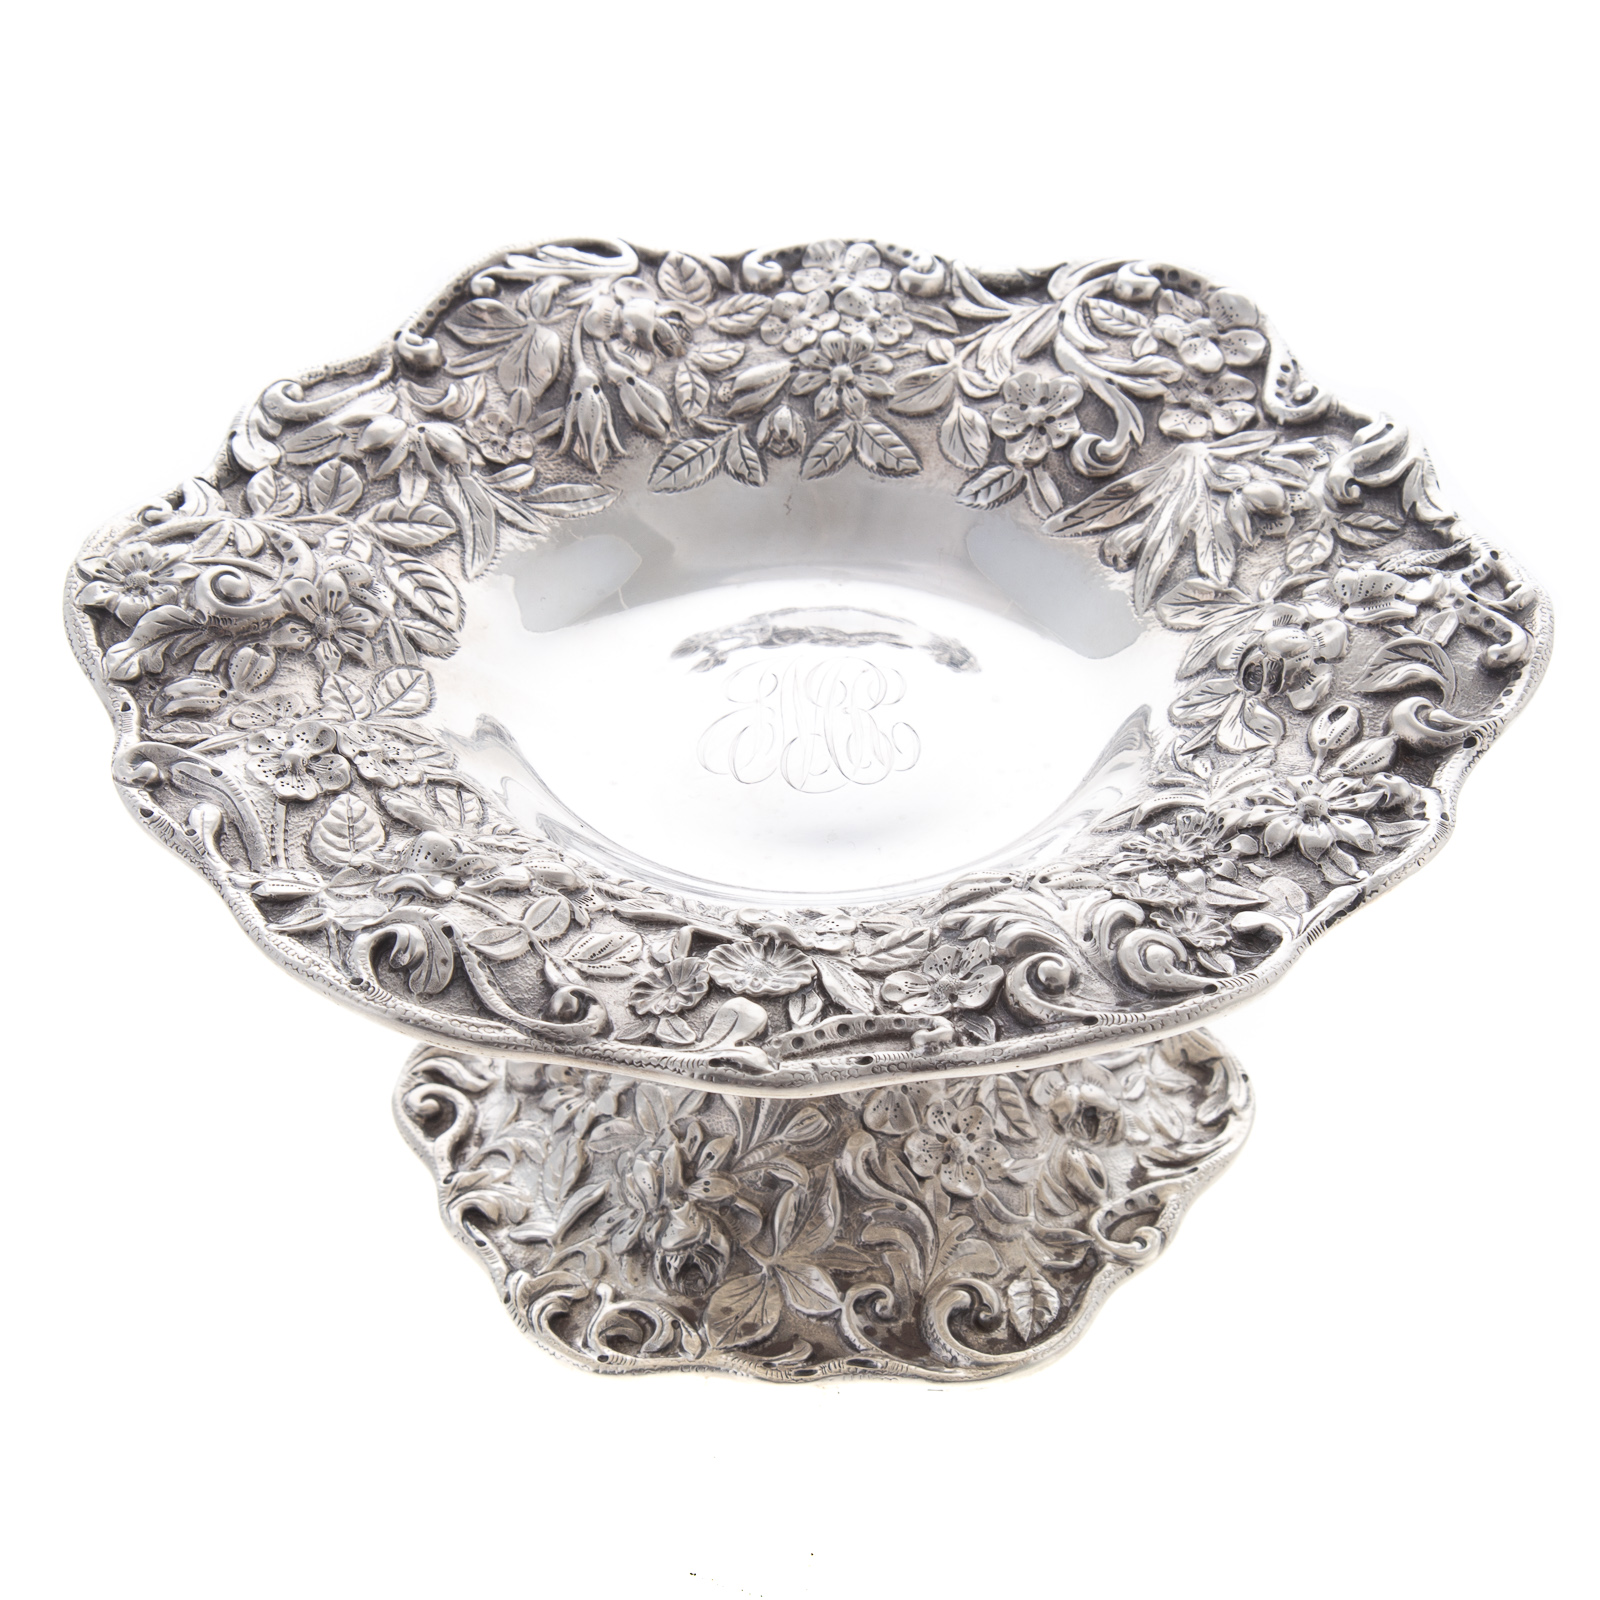 S KIRK SON CO STERLING REPOUSSE 334079